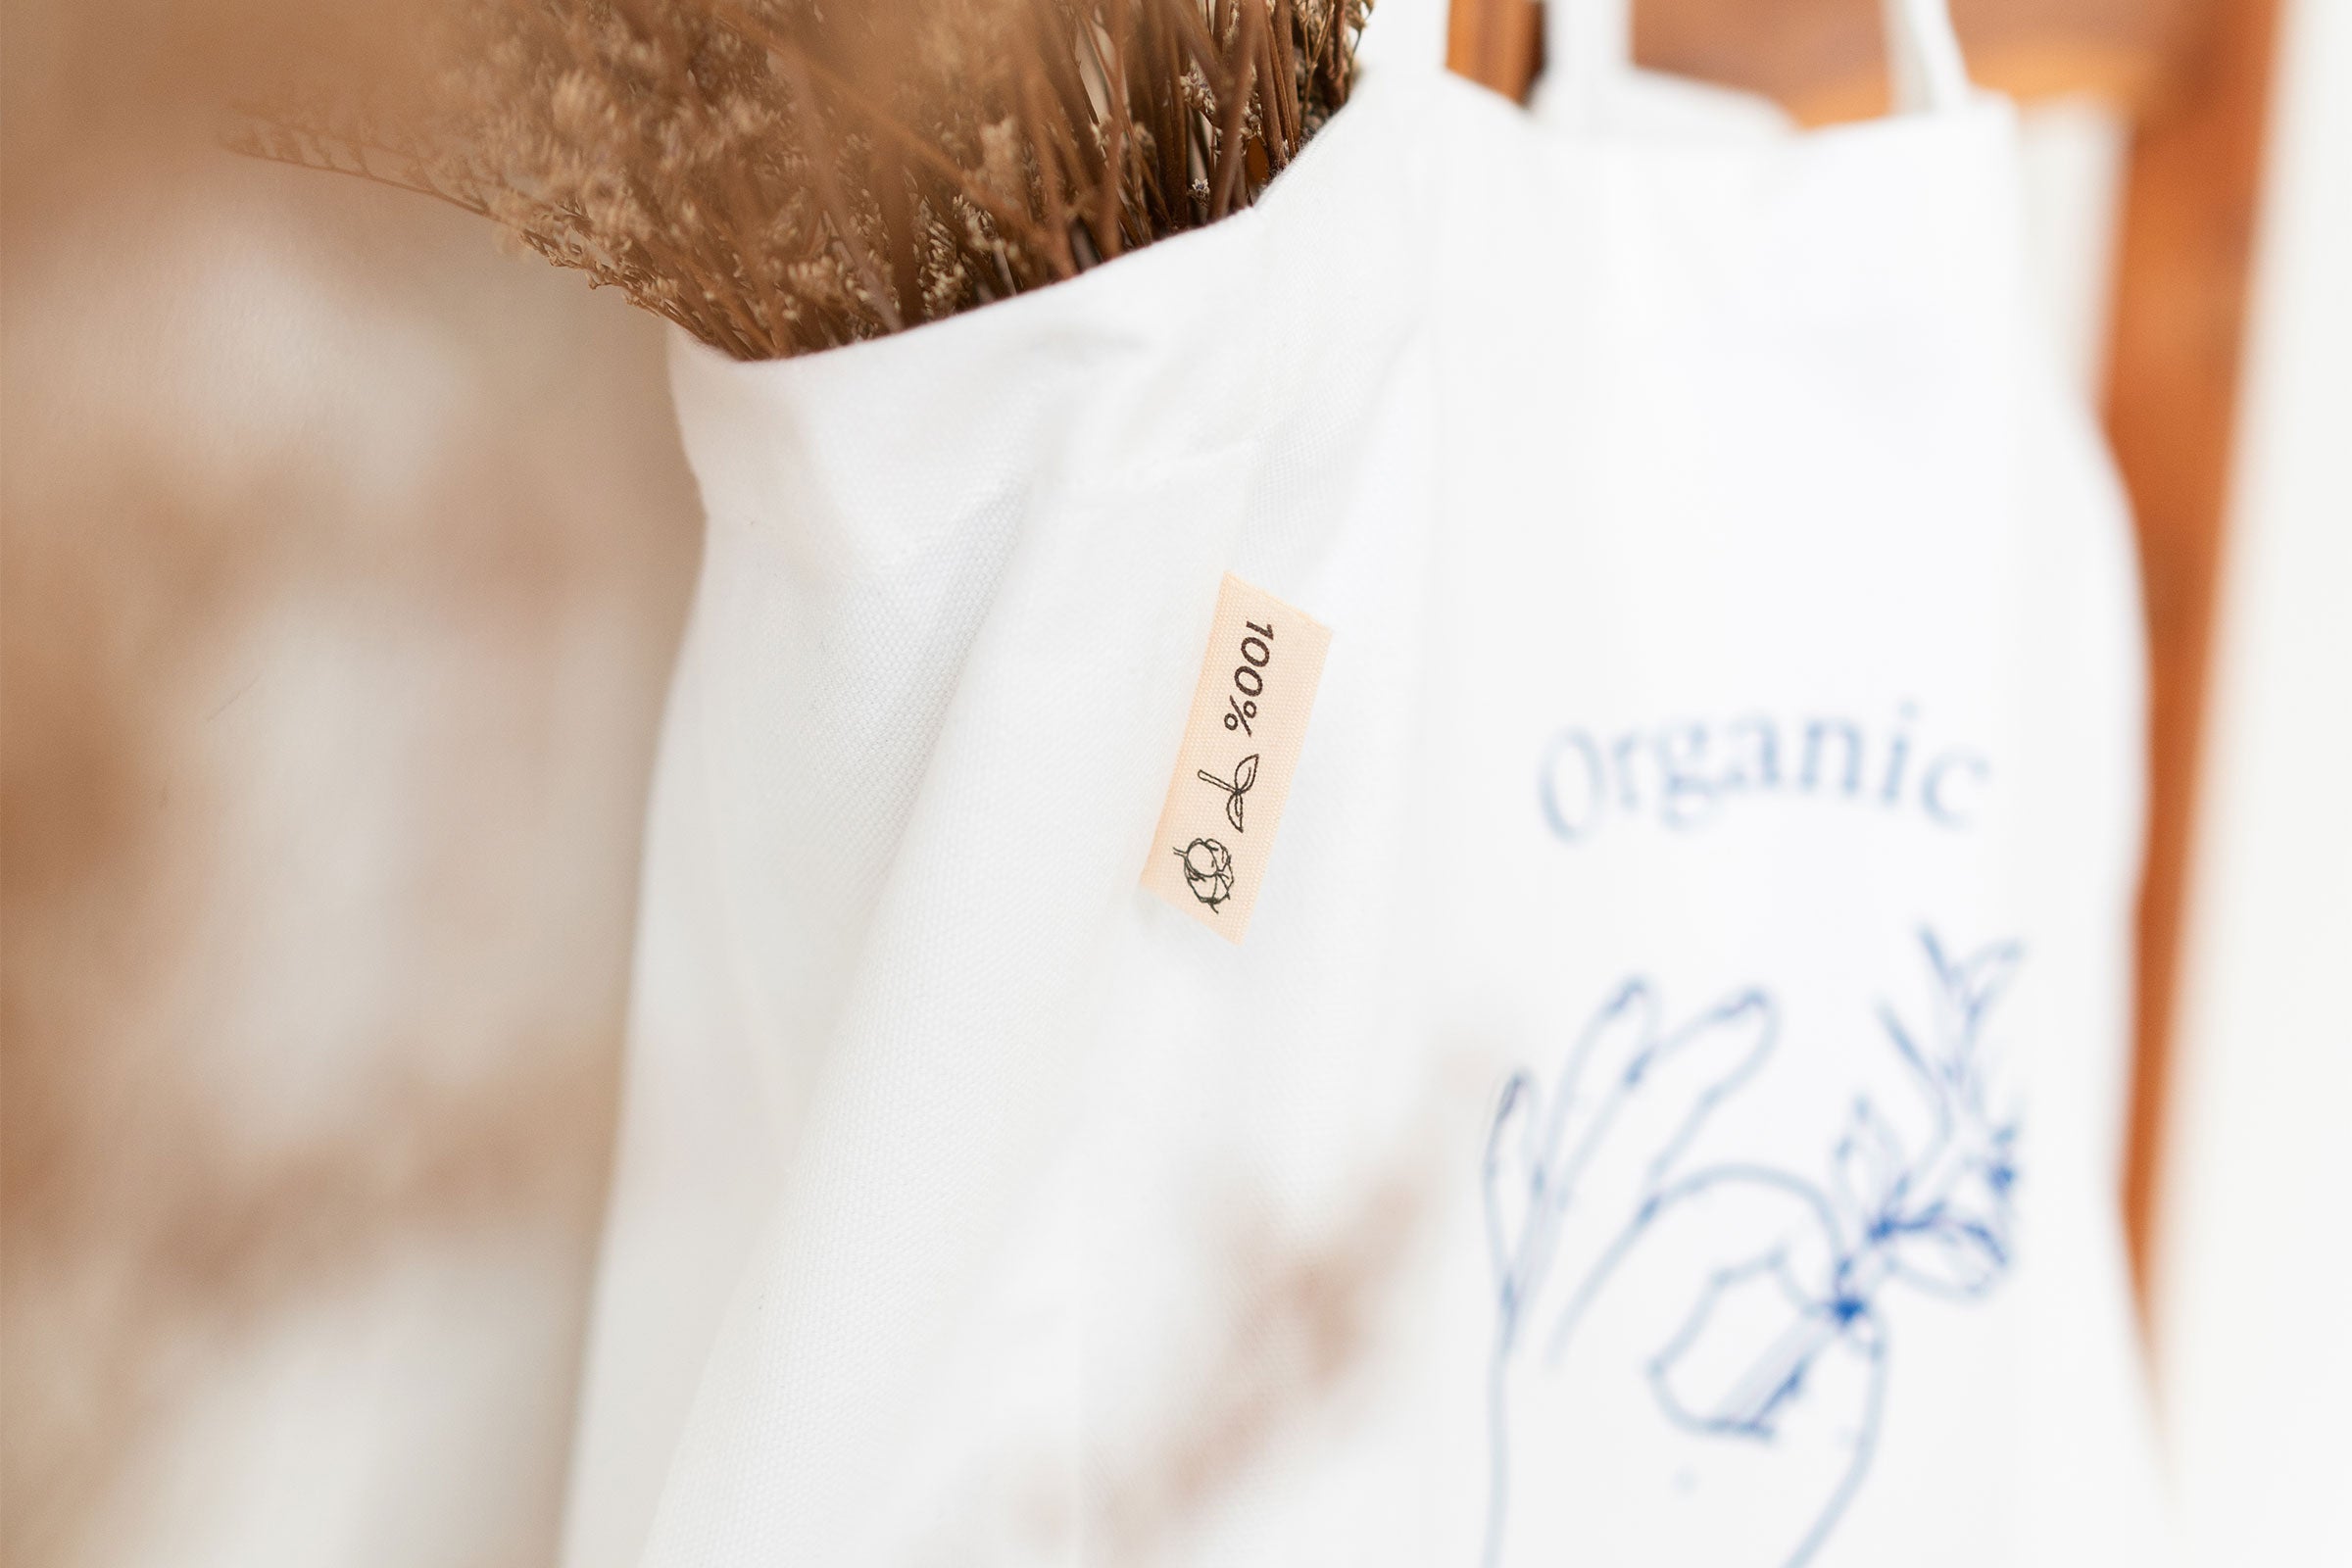 organic-cotton-tote-bag-in-white-colour-organic-tag-design-by-sojao